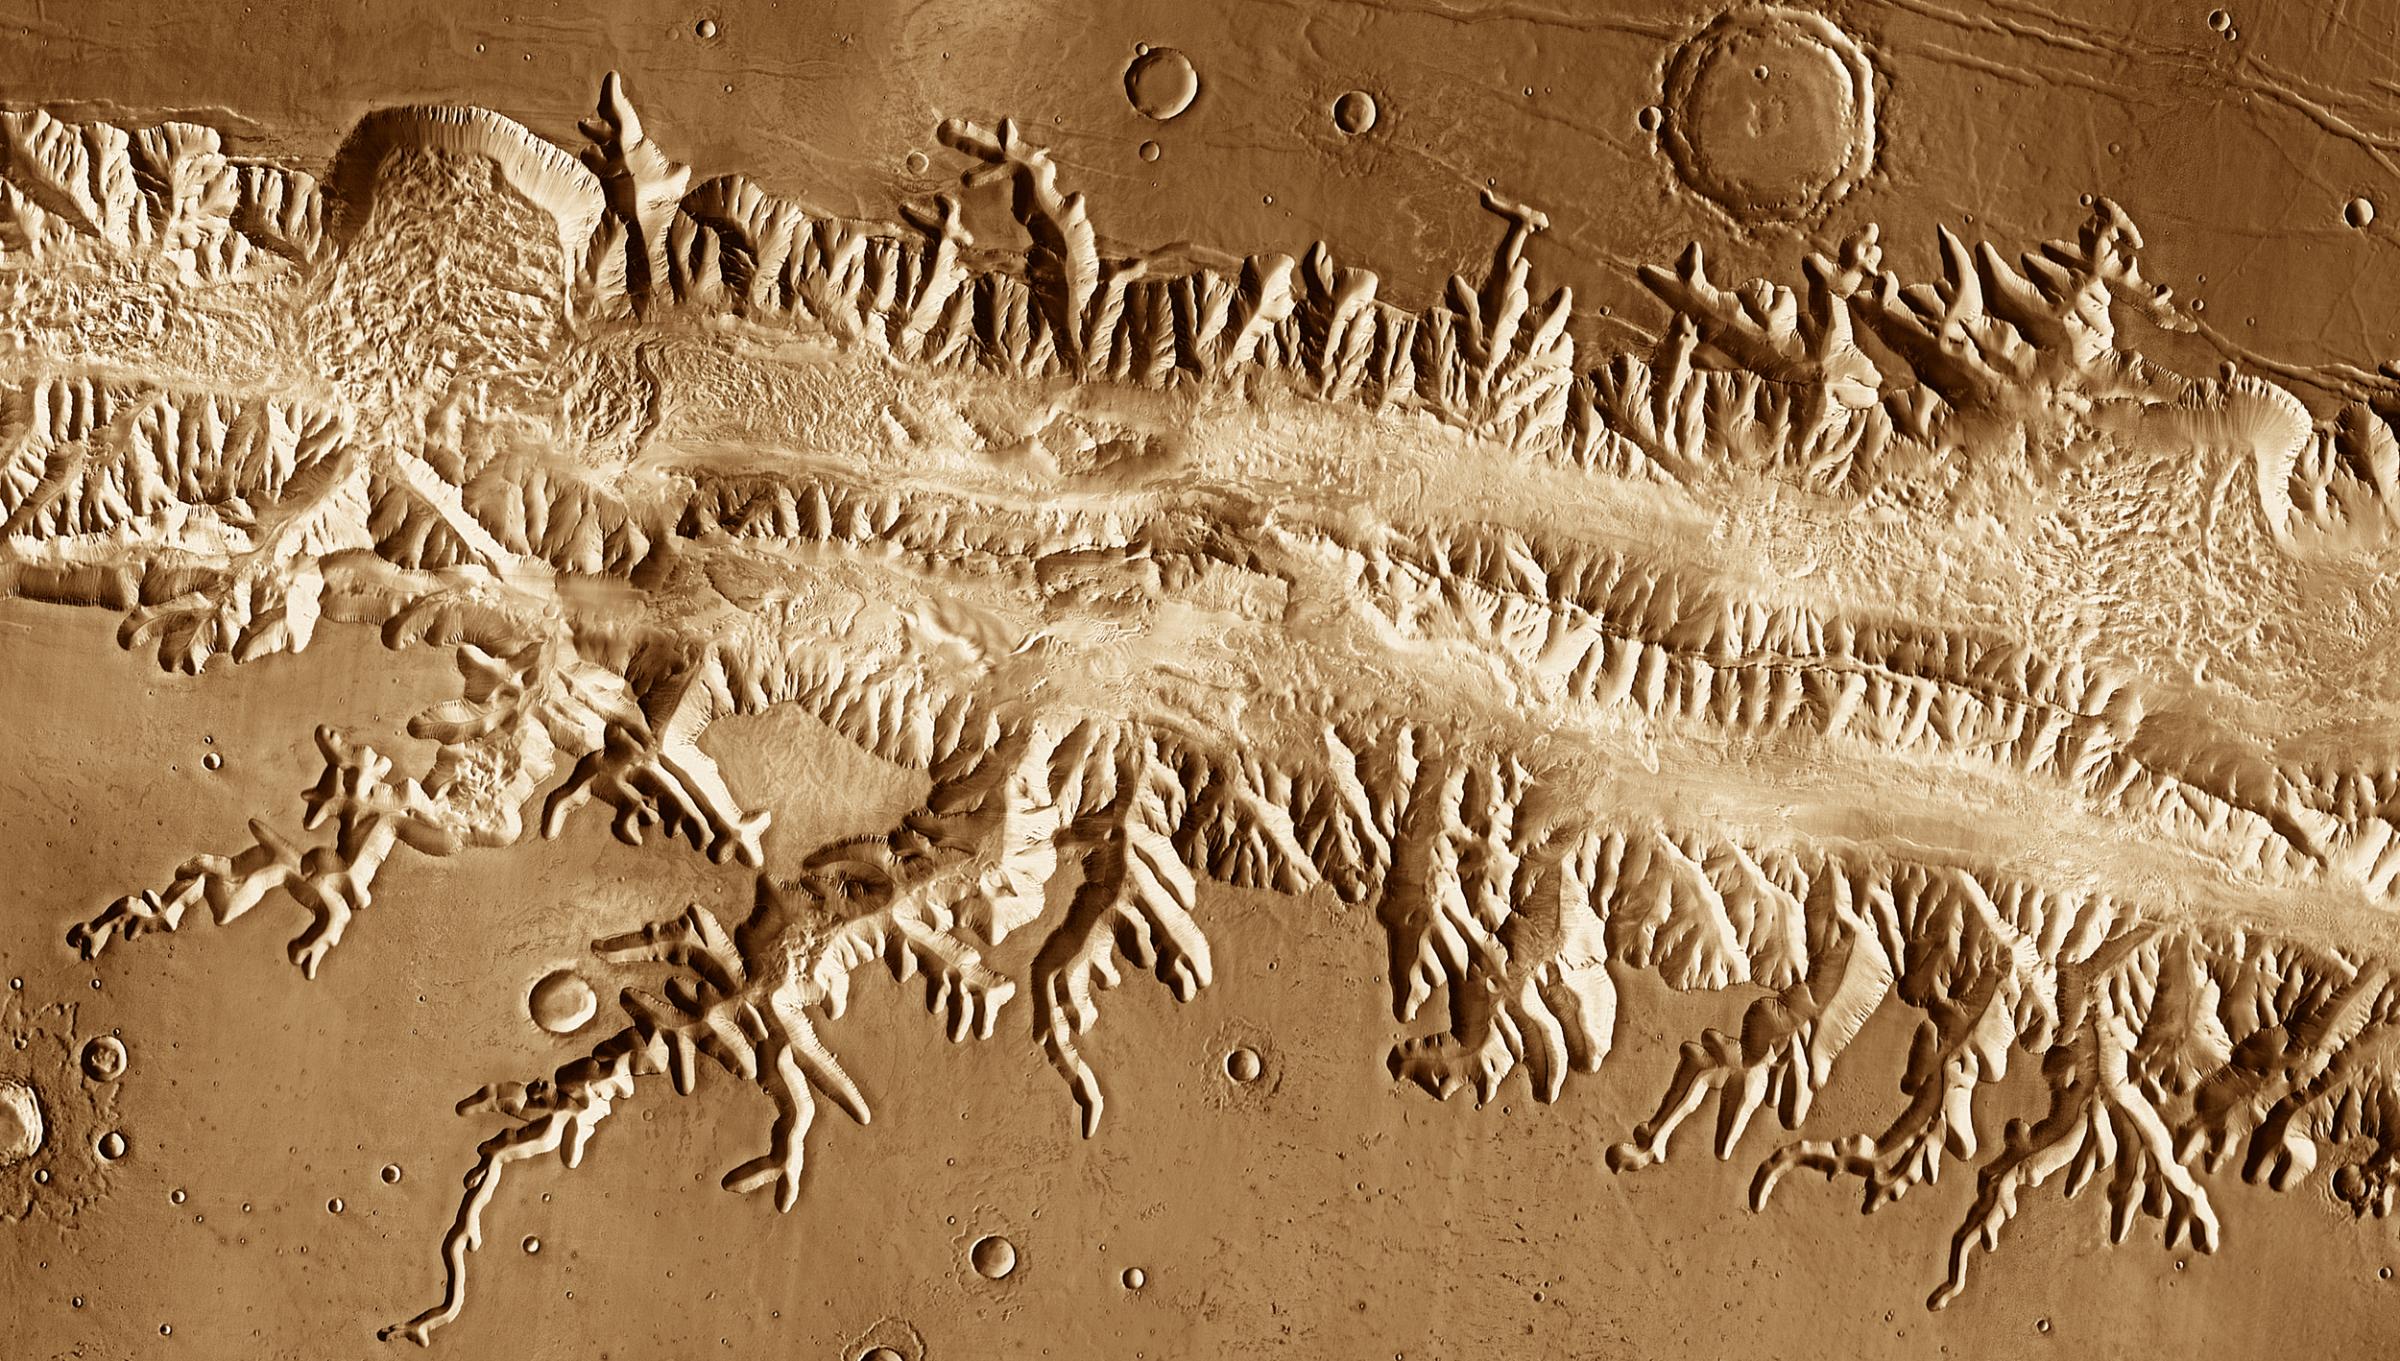 Valles Marineris: With a length great enough to stretch from New York to Los Angeles, Valles Marineris is the Grand Canyon of Mars. Scientists think the canyons cutting into the rim developed as subsurface water escaped and the ground collapsed, a process called "sapping." This image was acquired July 2005 by the Thermal Emission Imaging System instrument on NASA's Mars Odyssey orbiter.